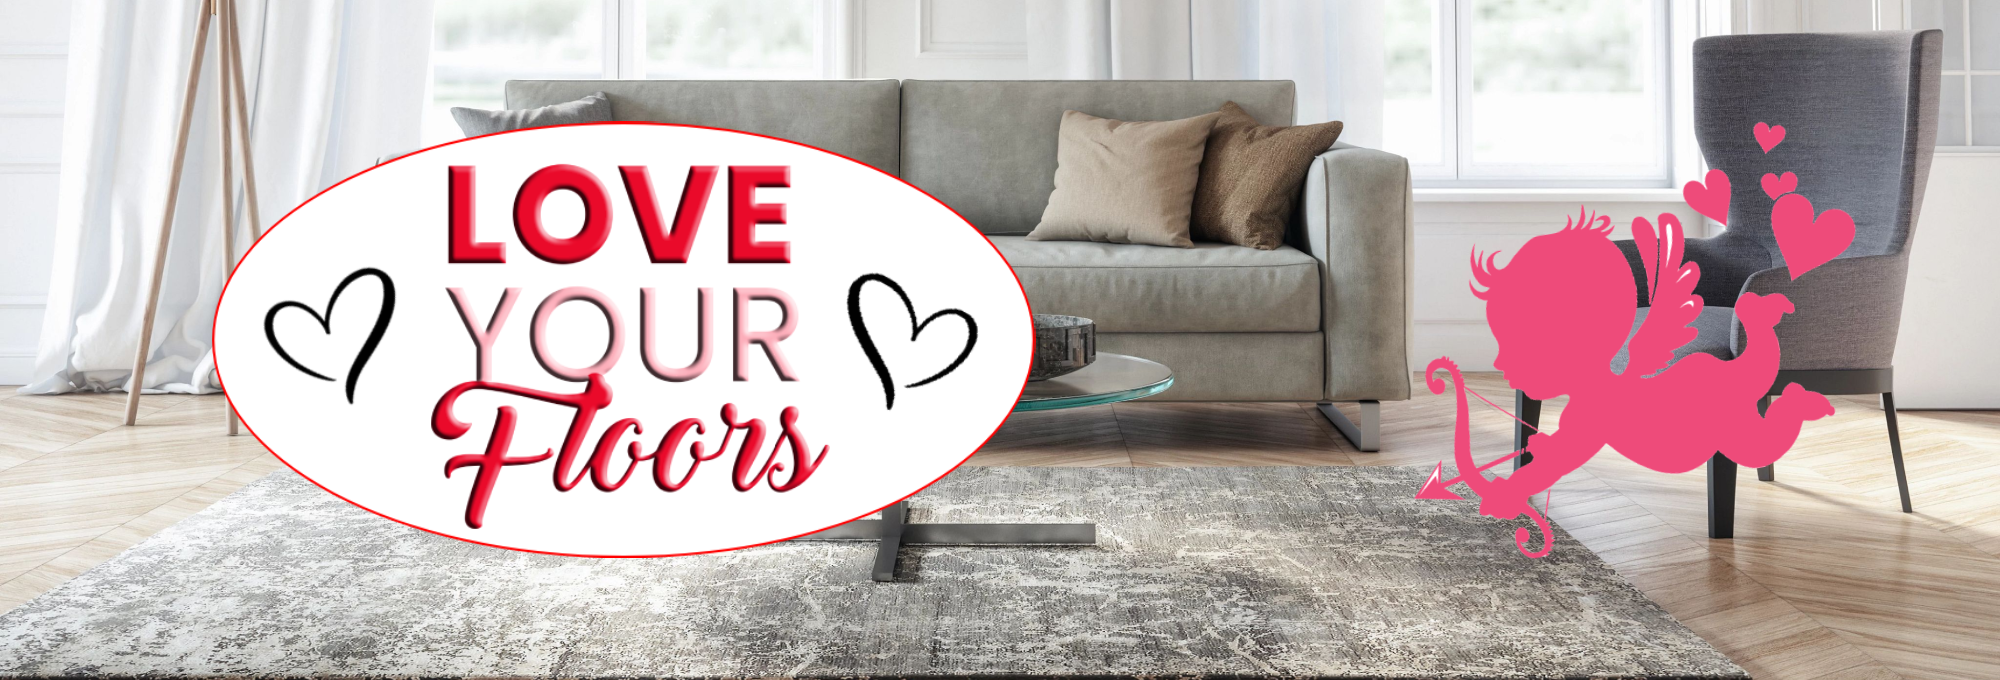 Love Your Floors This Valentine's, with our new February Specials | New Holiday Sales Coming Soon |